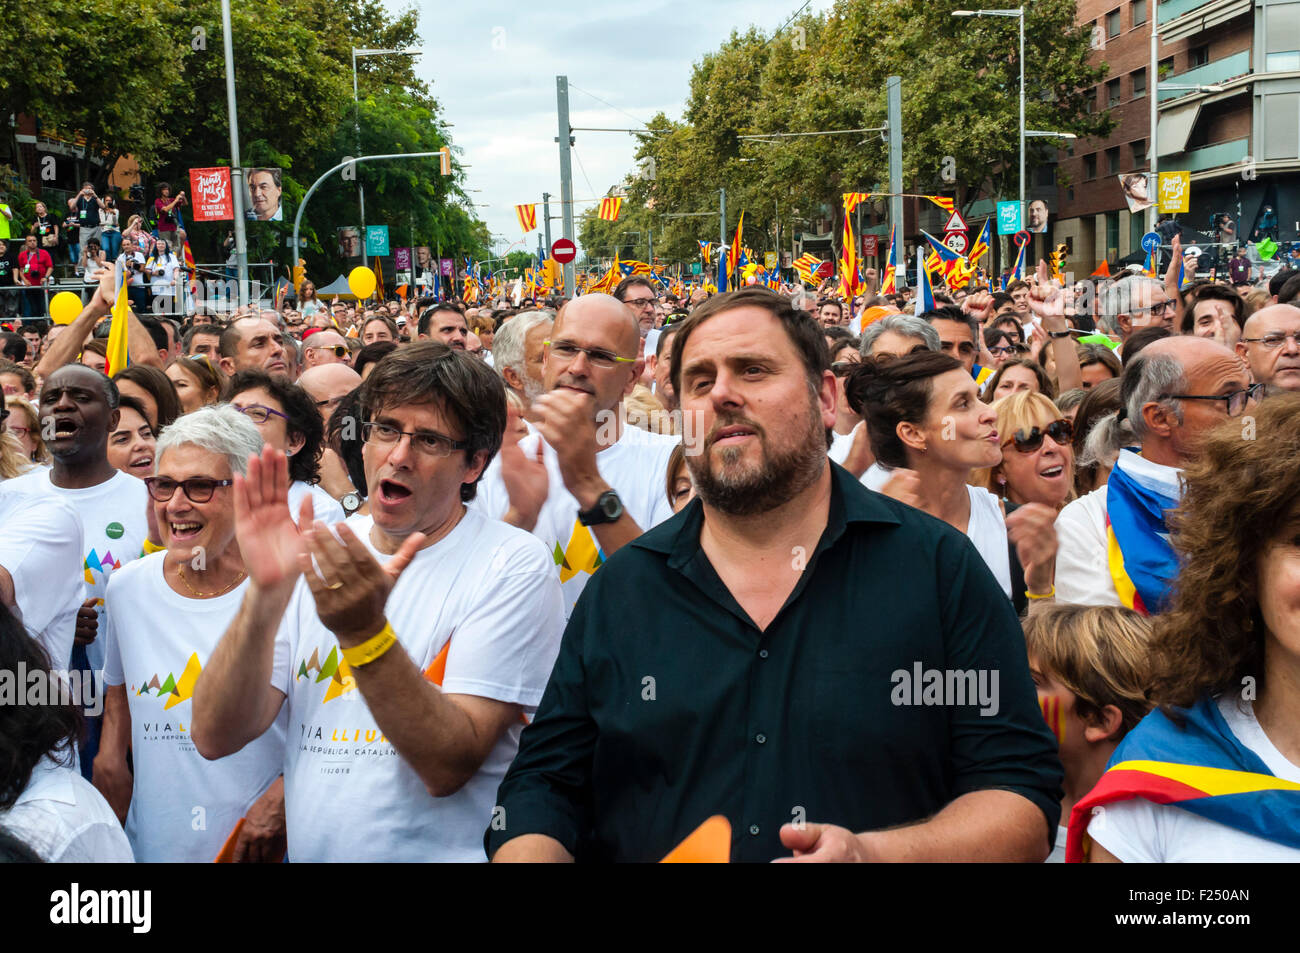 Barcelona , Catalonia, Spain . 11th Sep, 2015. The candidates Junts pel Yes , Oriol Junqueras , Raul Romeva , Carme Forcadell and Muriel Casals, during the Via Lliure to the Catalan Republic , independence mobilization organized by the Catalan National Assemblea and Omnium Cultural in the national day catalonia. The independence demonstration convened hundreds of thousands of people in Barcelona Avenida Meridiana Credit:  Cisco Pelay / Alamy Live News Stock Photo